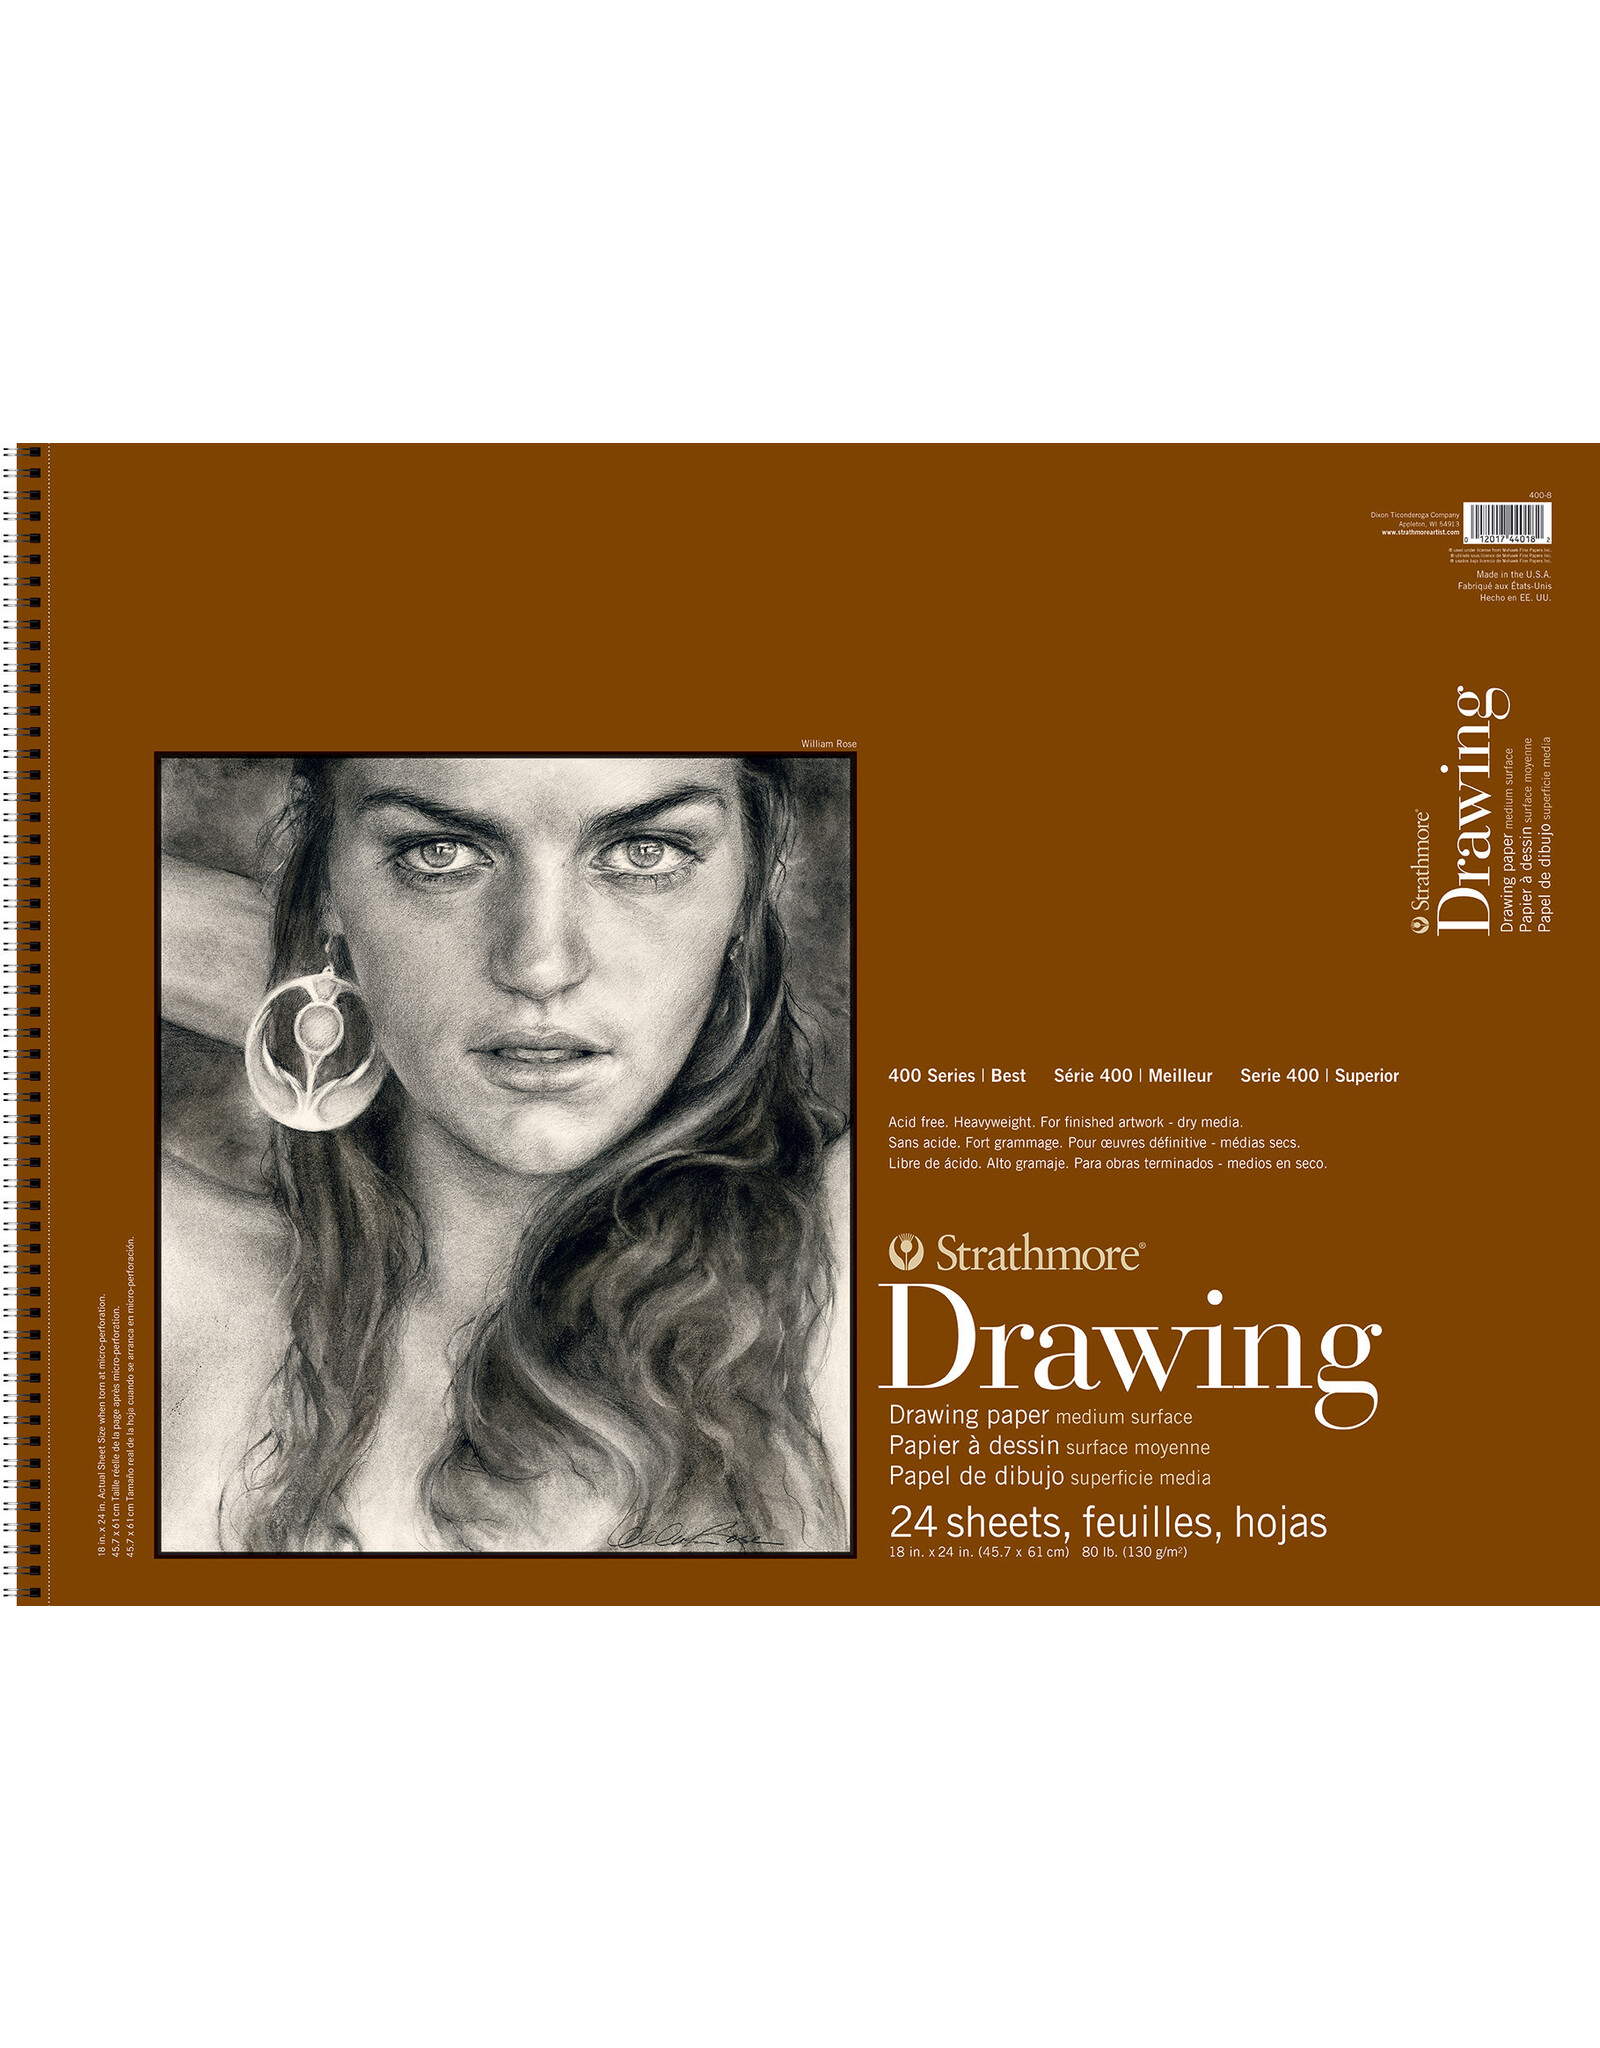 Strathmore Strathmore 400 Series Drawing Pads, 24 Sheets, 18” x 24”